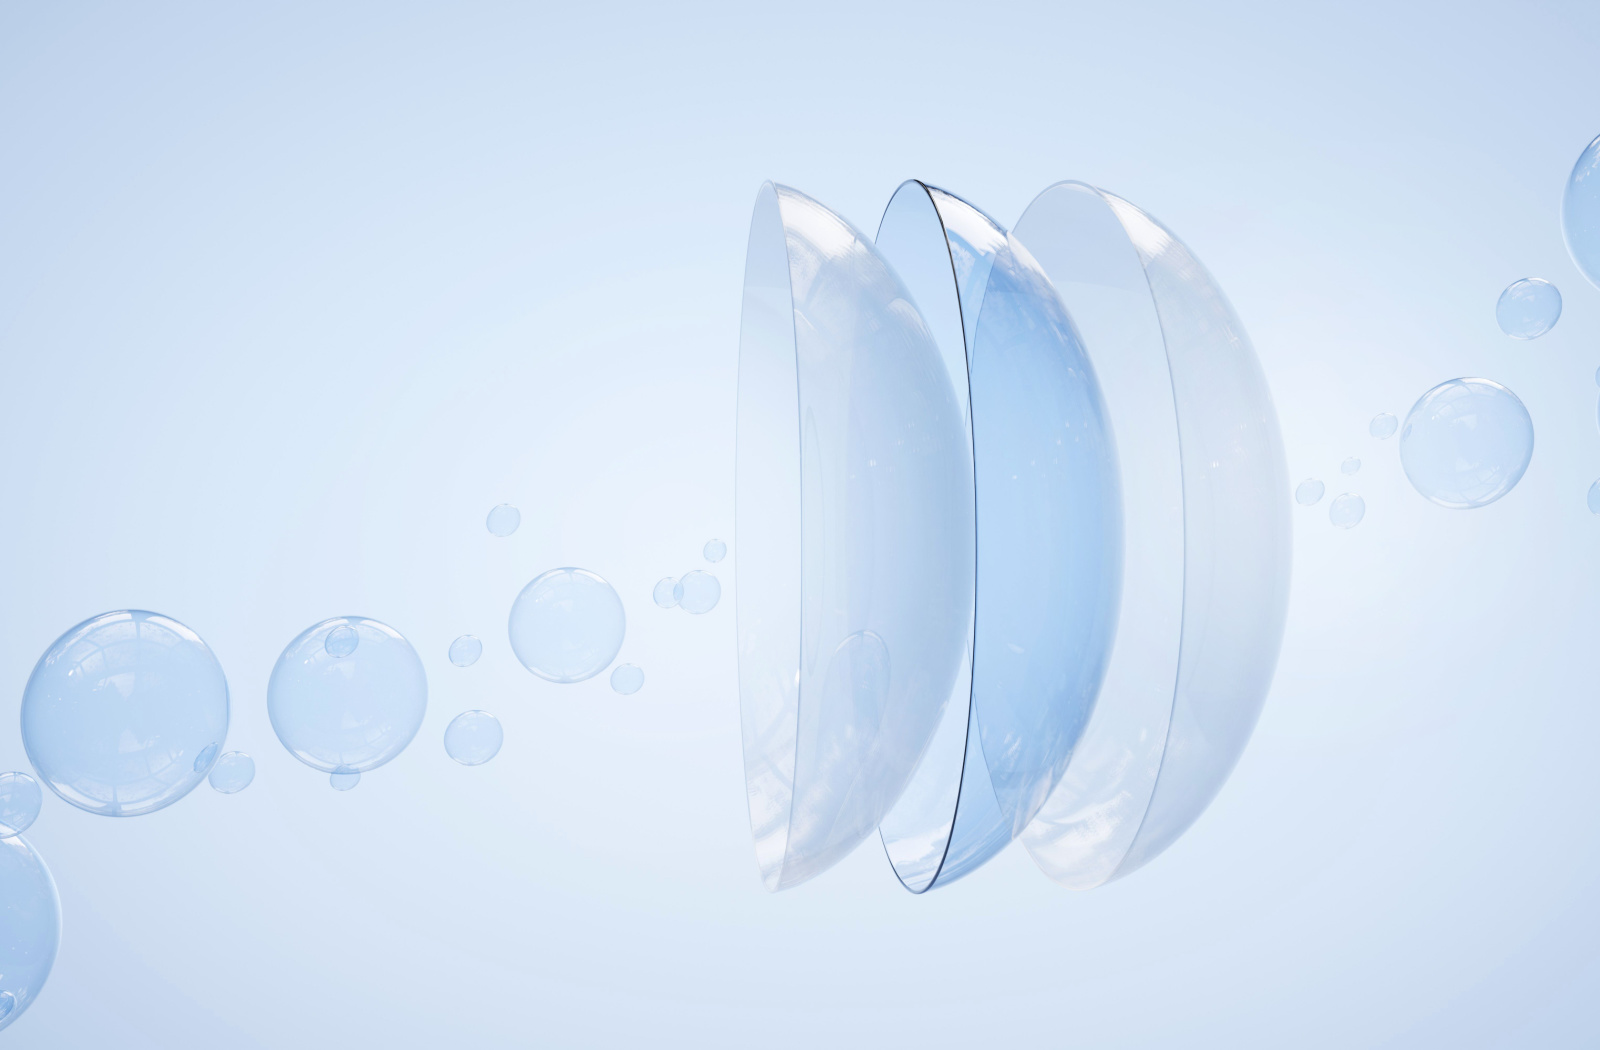 A digital graphic showing contact lenses with three different layers, looks as if the contact lenses are floating